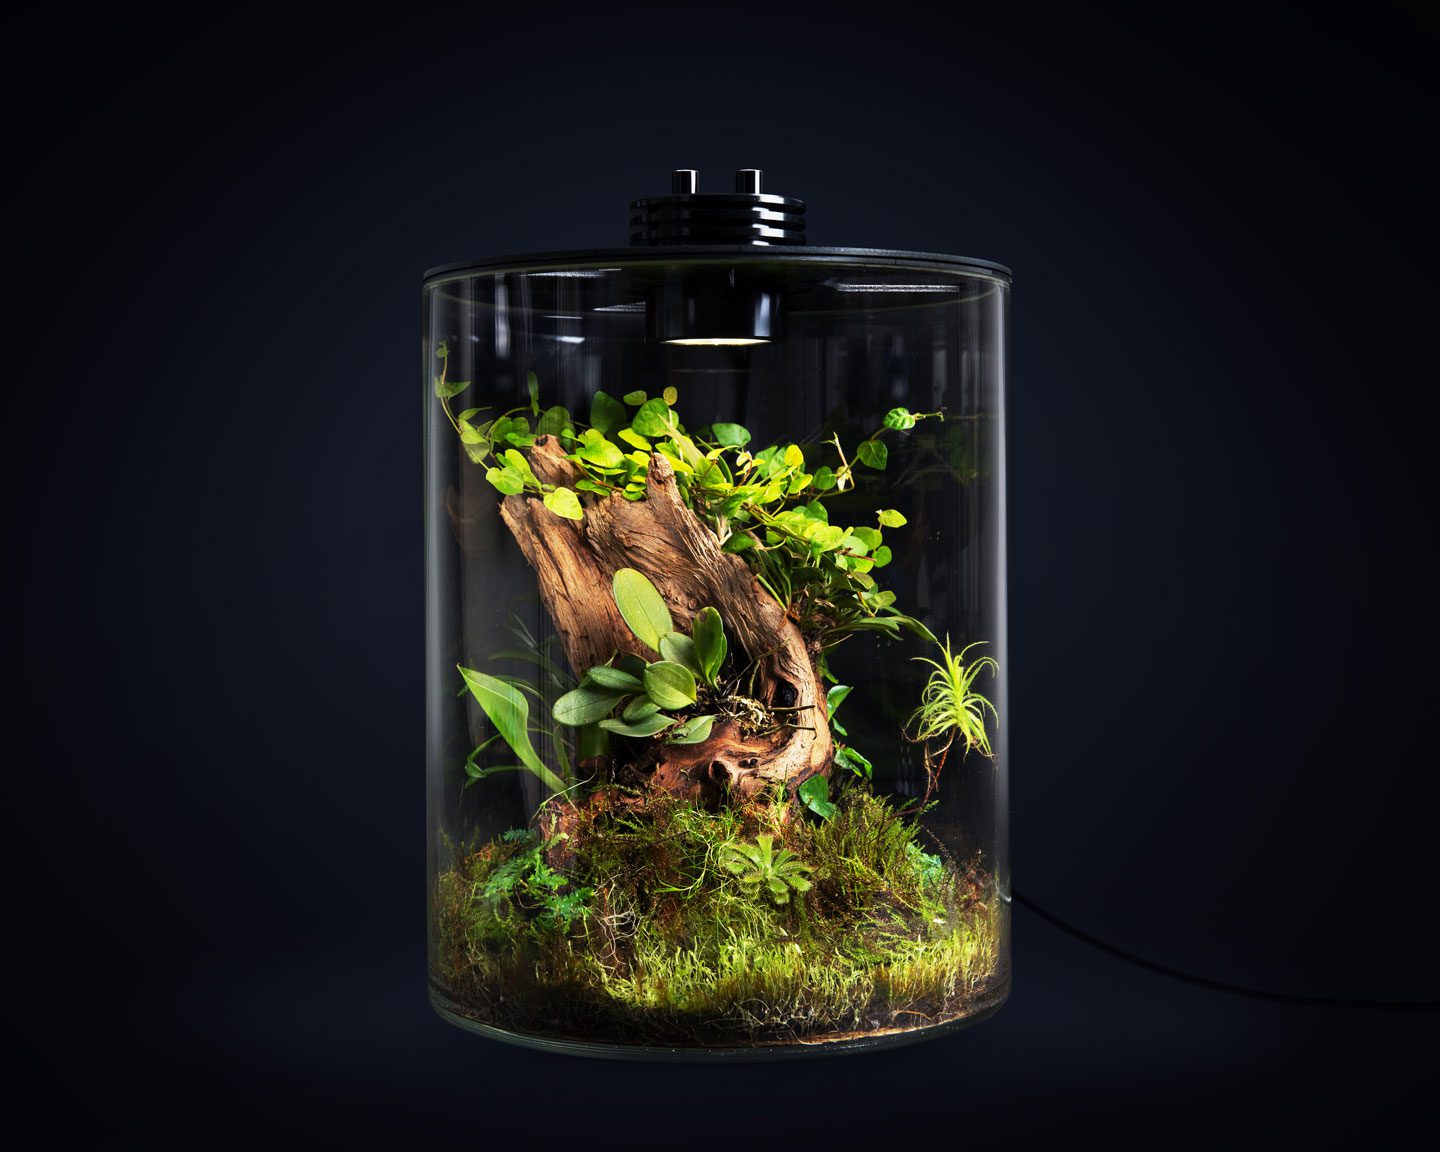 Baiosphere tube with plants and on an dark background